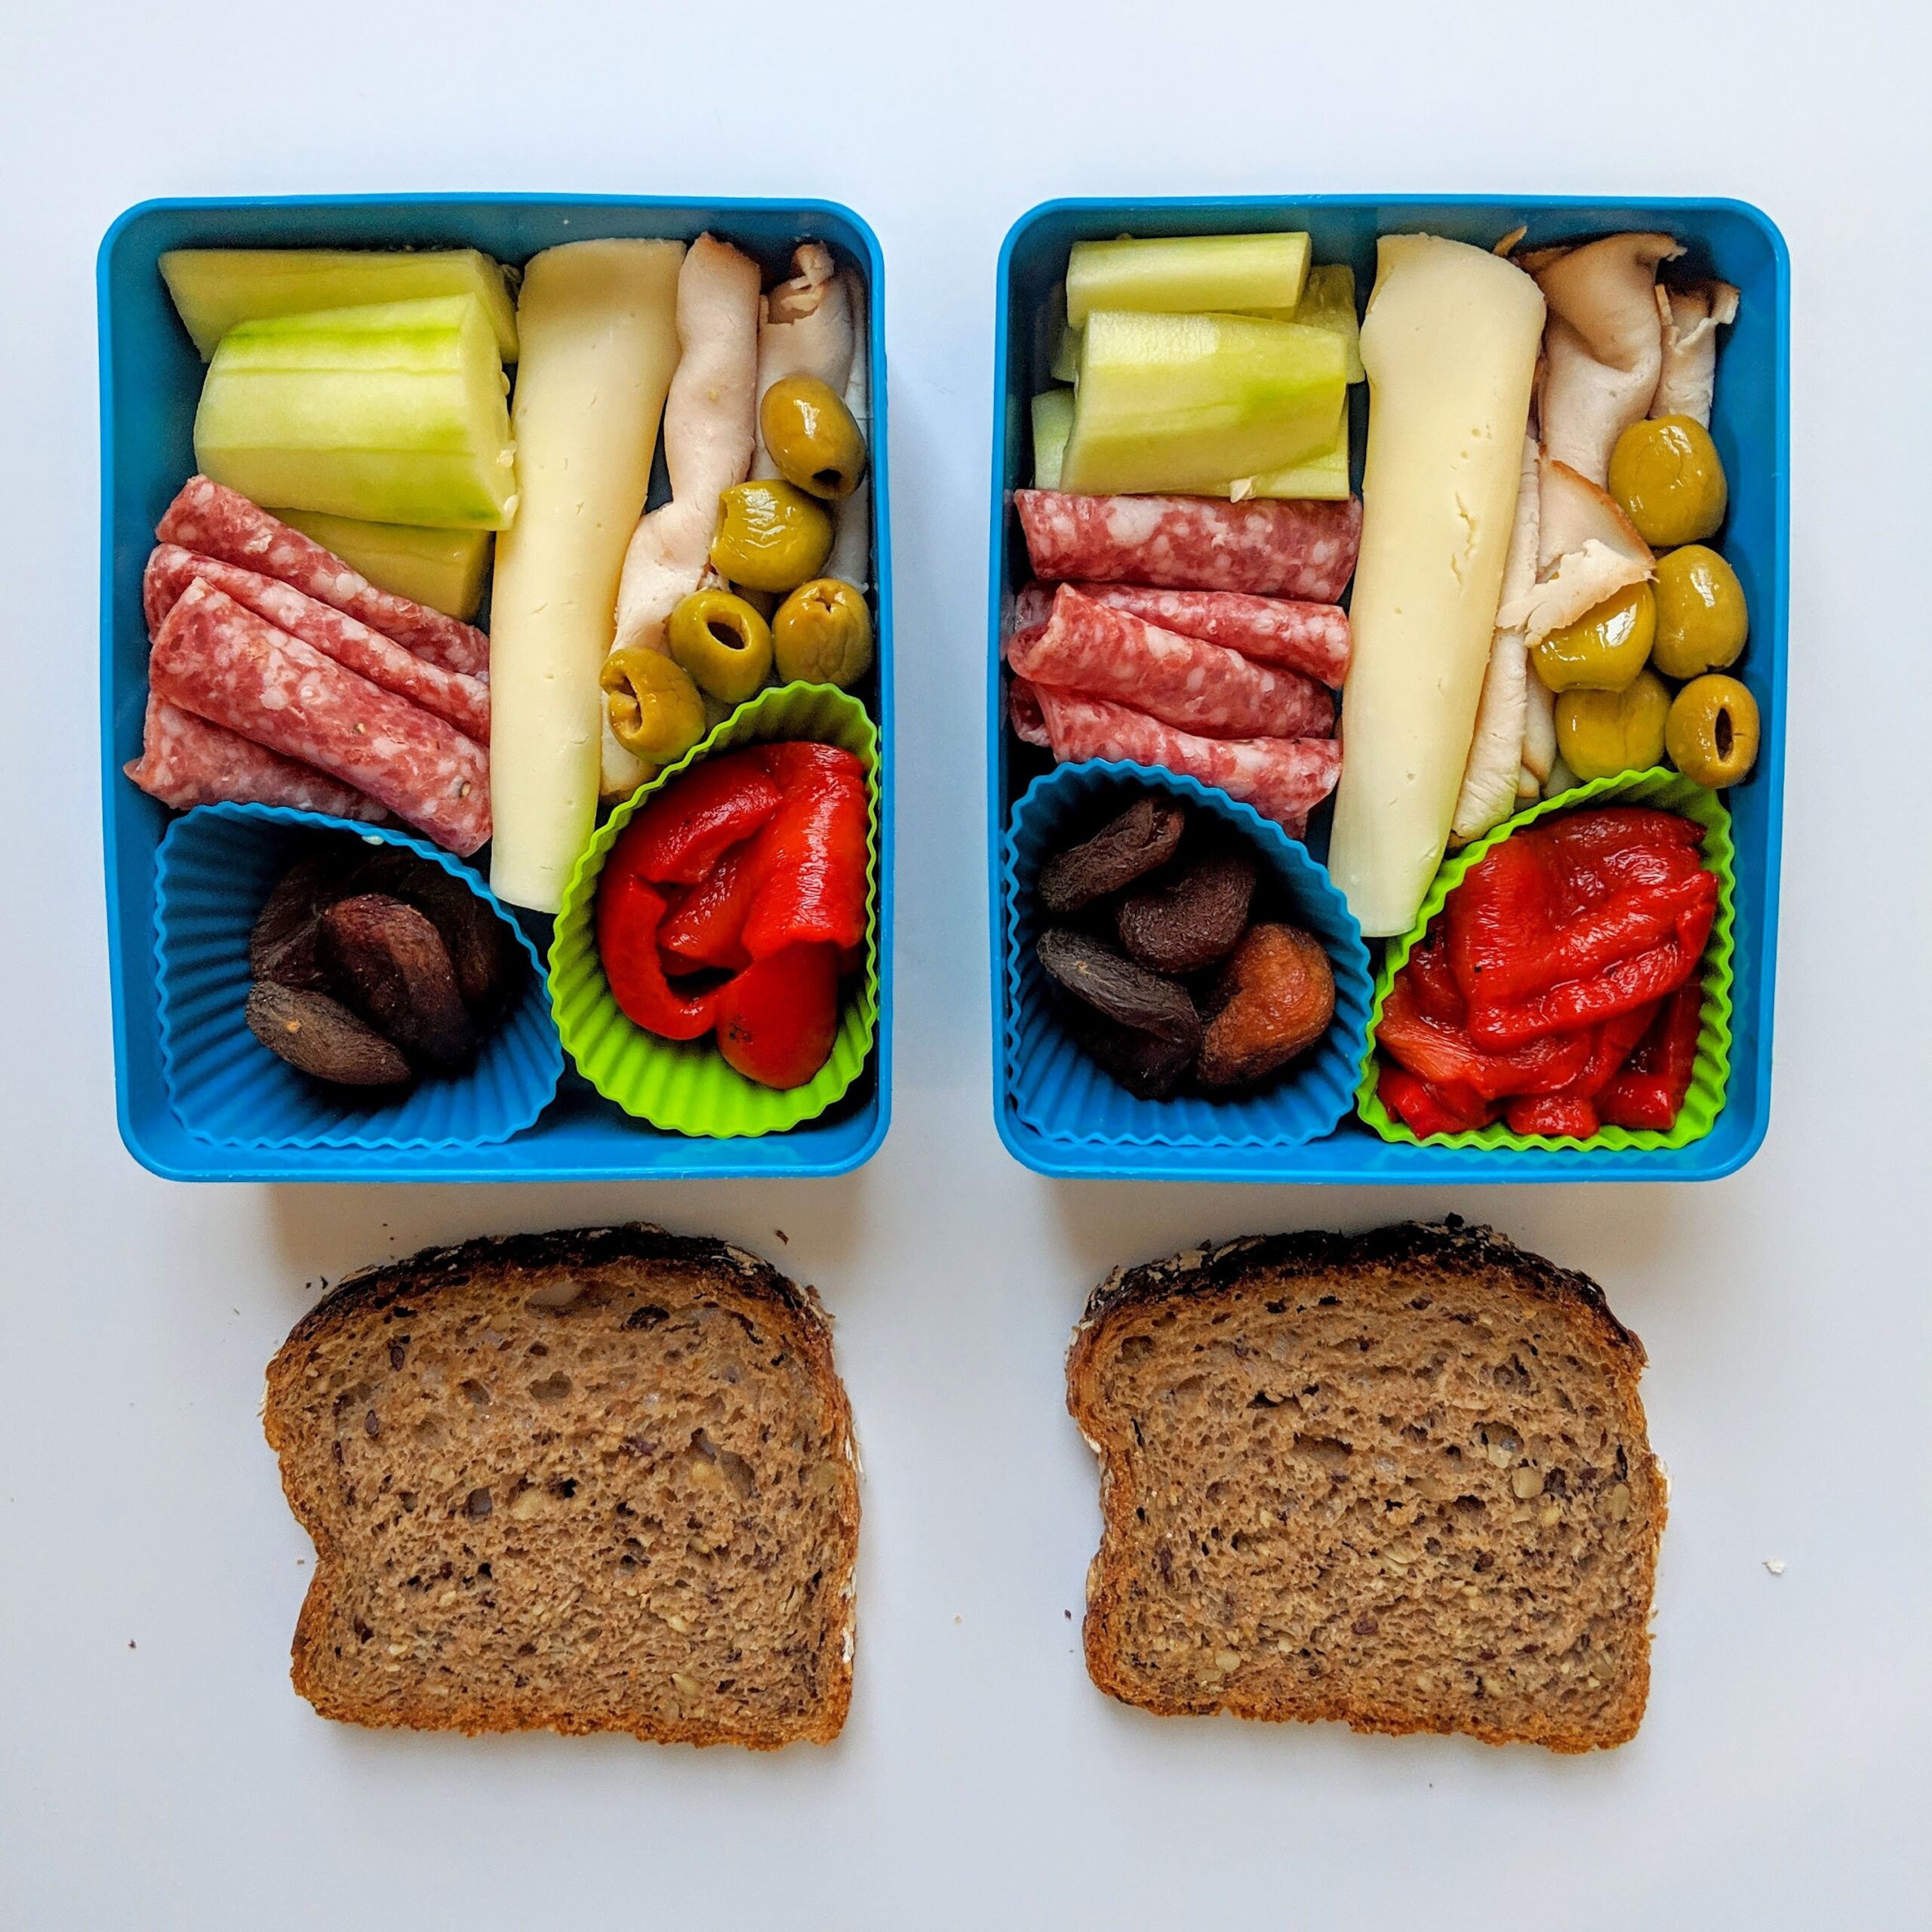 https://nourishednotfamished.com/wp-content/uploads/2020/02/charcuterie-lunch-idea-example-May-2019-scaled.jpg